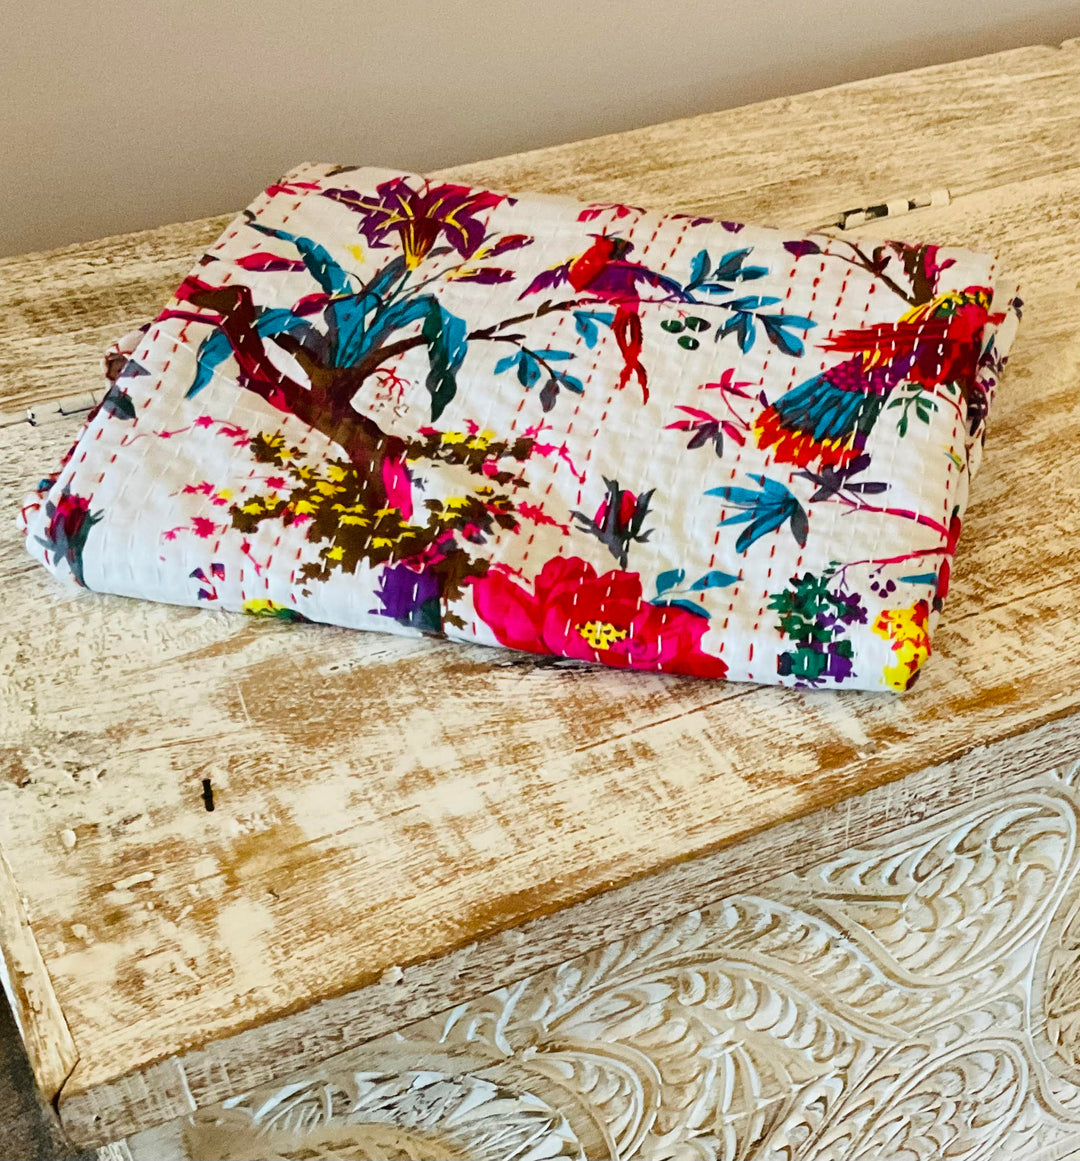 Vintage Indian Birds Kantha Recycled Multi Colour White Cotton Throw Bedspread Cover 150 cm x 216 cm